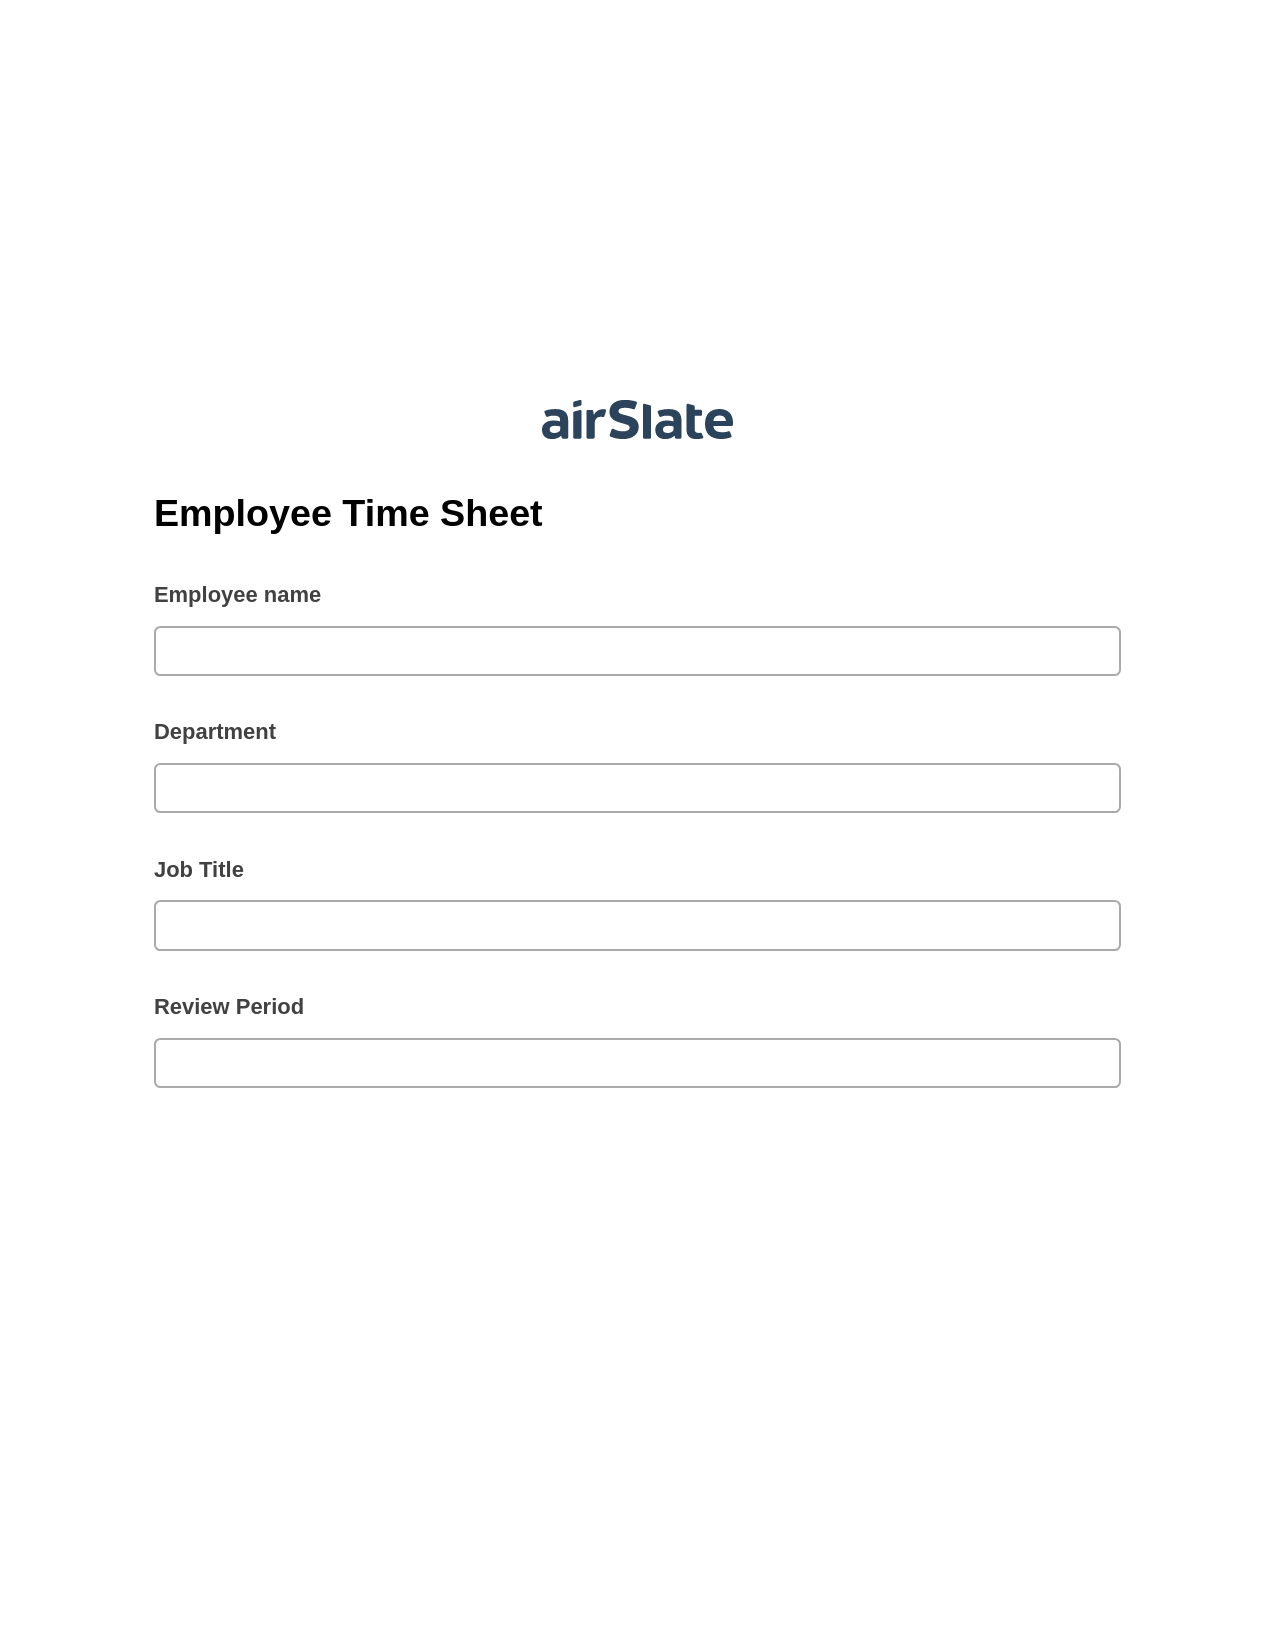 Multirole Employee Time Sheet Pre-fill from Salesforce Records Bot, Create slate addon, Export to Google Sheet Bot